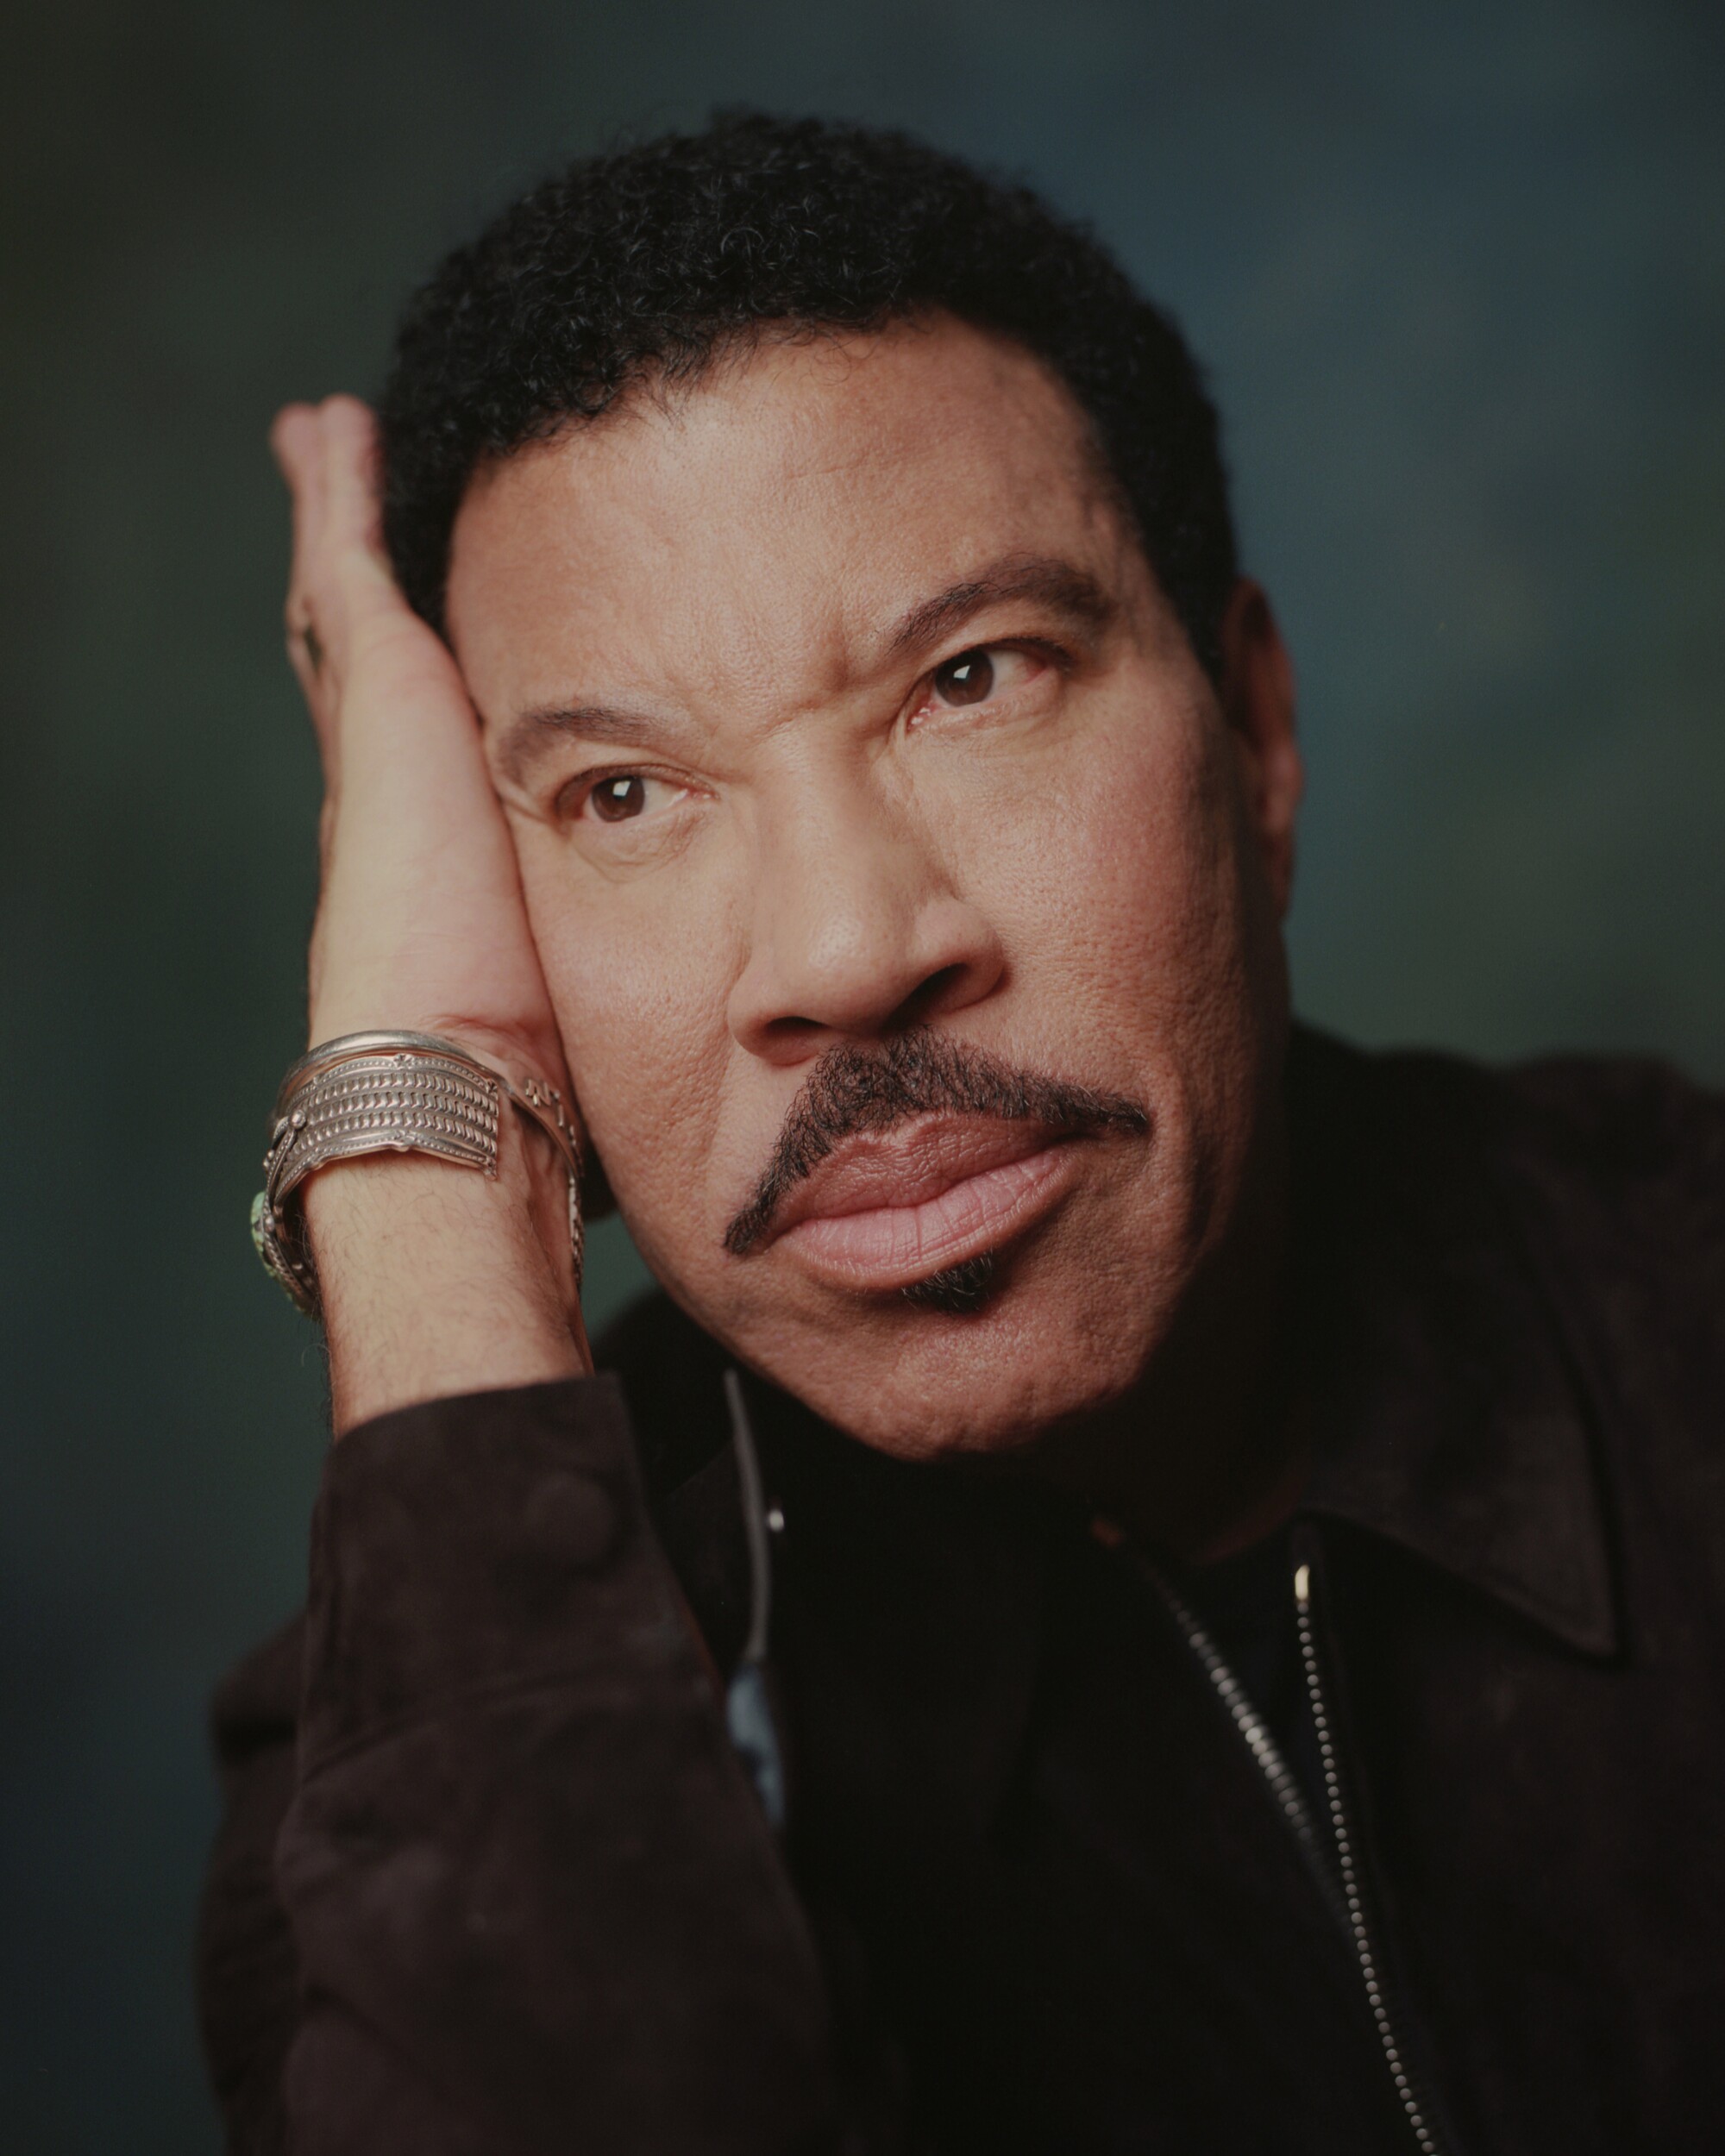 Lionel Richie poses, resting his head against his palm, looking pensive